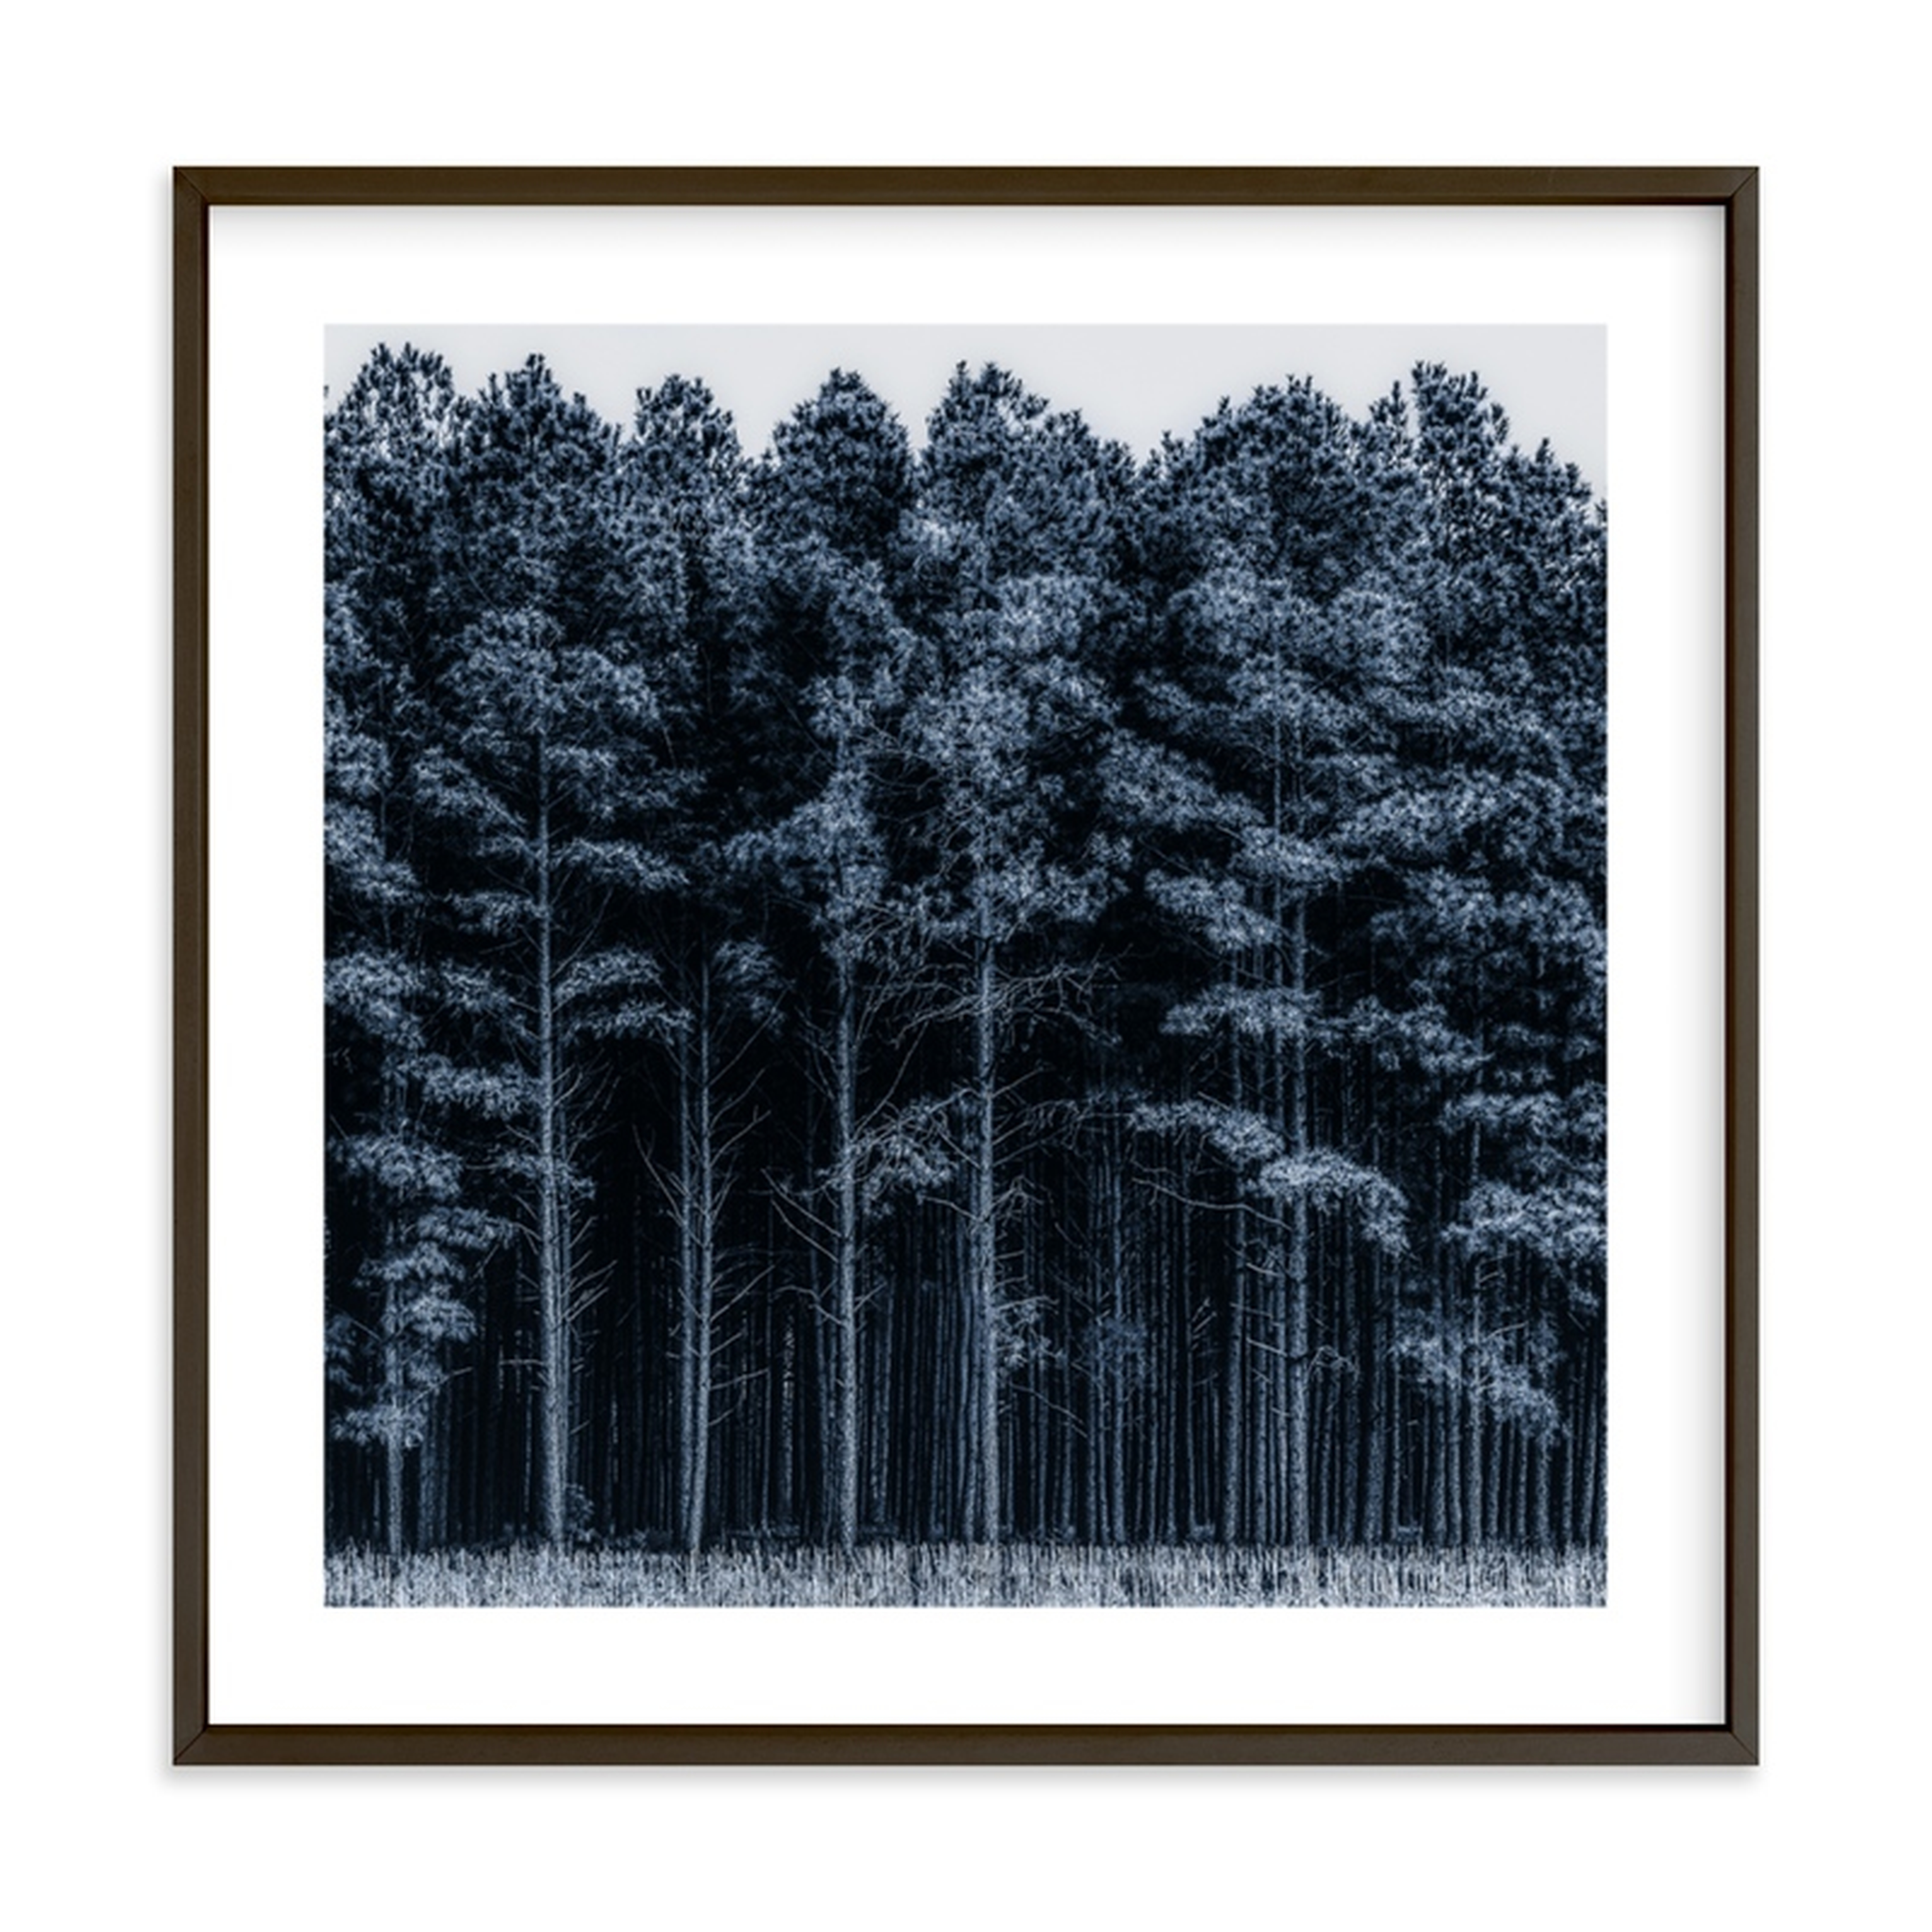 through the trees - FRAME SIZE  24.5" X 24.5" - Cool/Rich Black frame/White Border - Minted